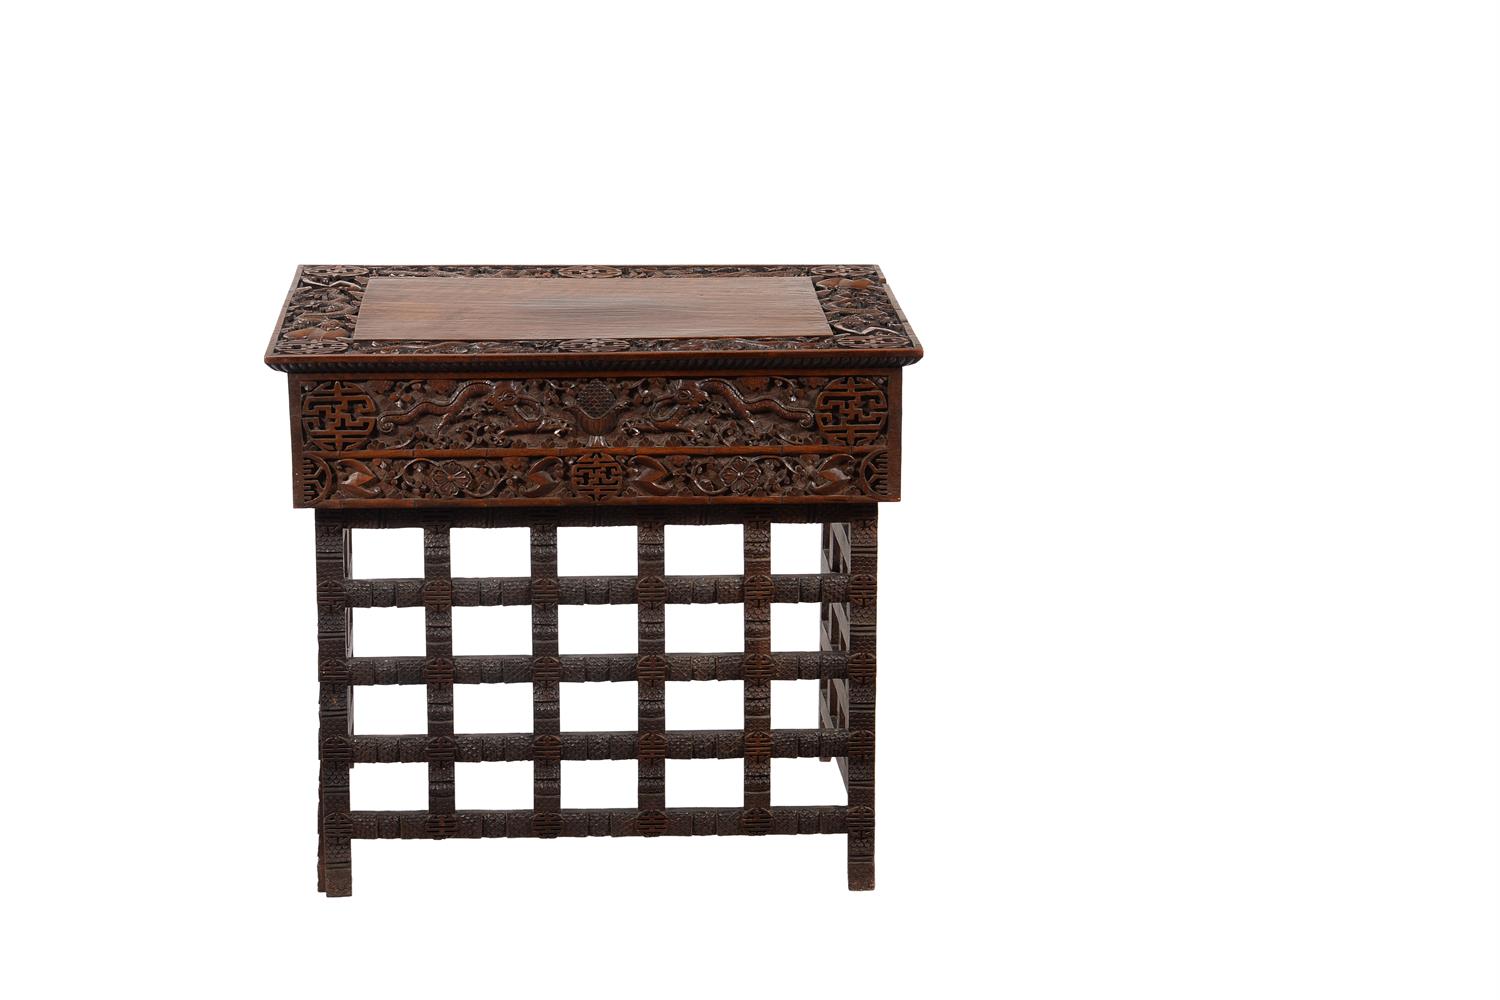 A Chinese carved hardwood rectangular table